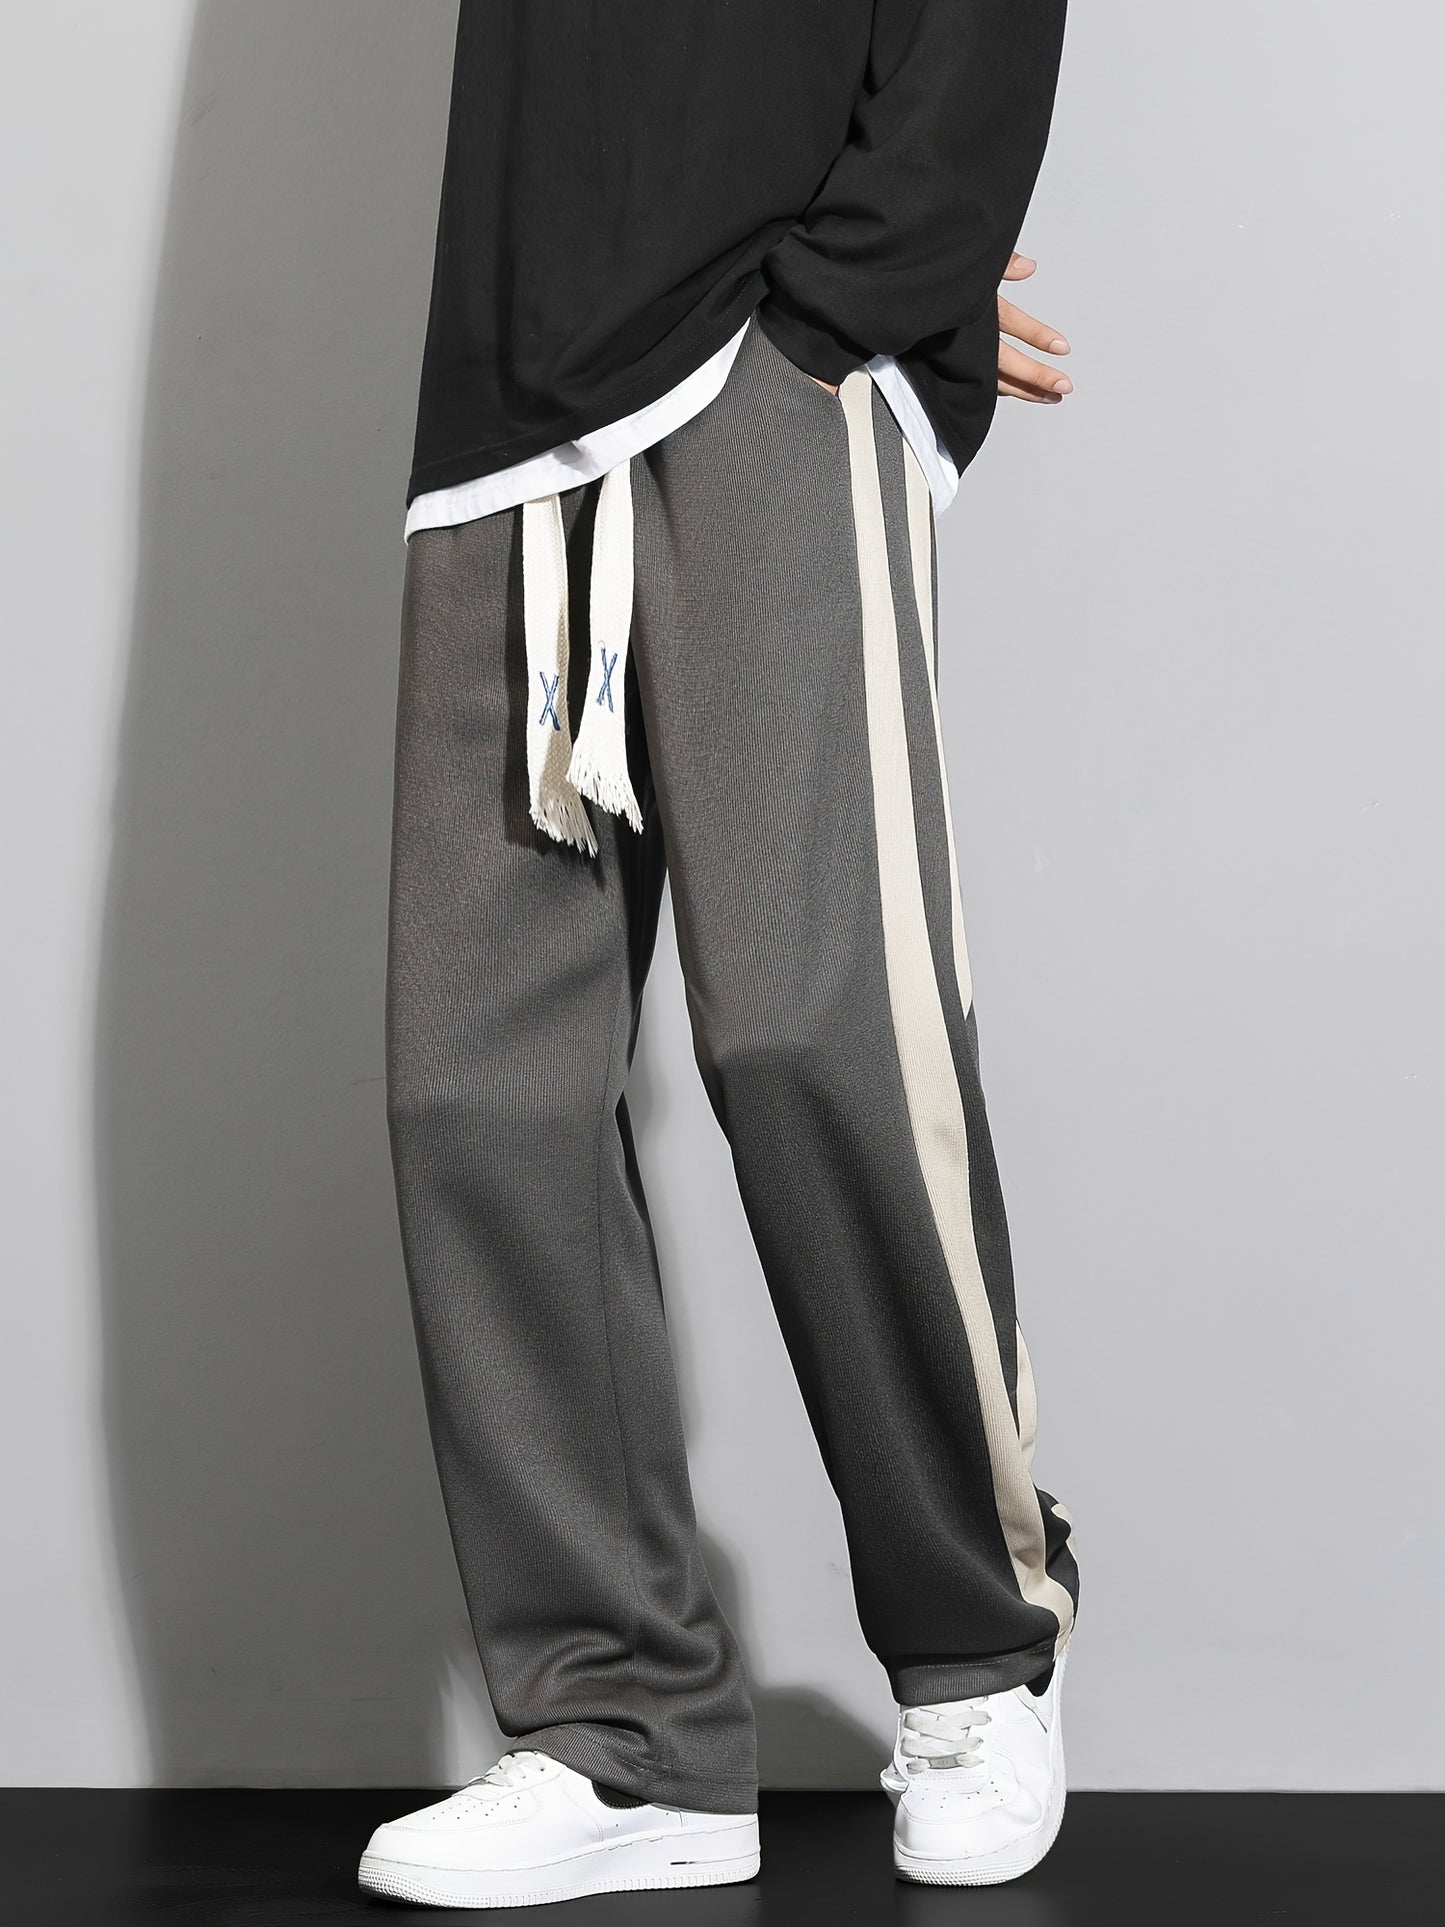 Men's Stylish Loose Stripe Pattern Pants With Pockets, Casual Breathable Drawstring Trousers For City Walk Street Hanging Outdoor Activities